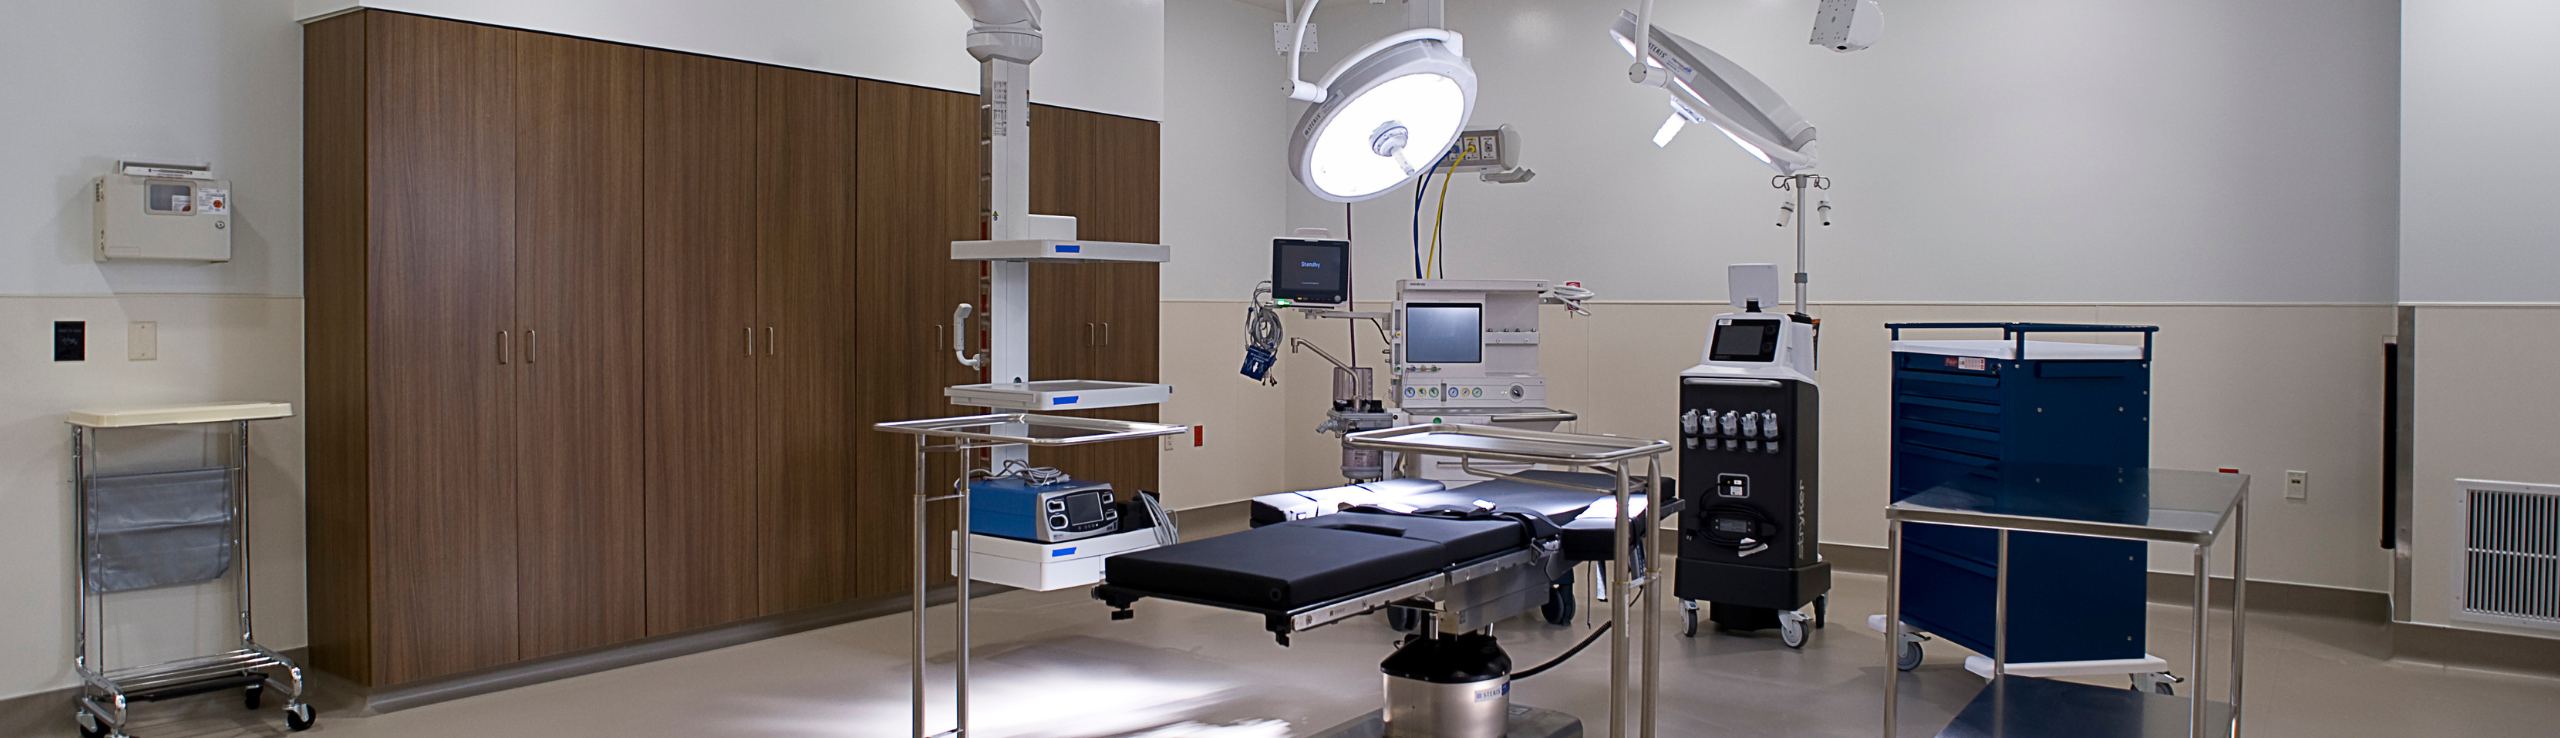 Picture of operating room at Hegg Health Center